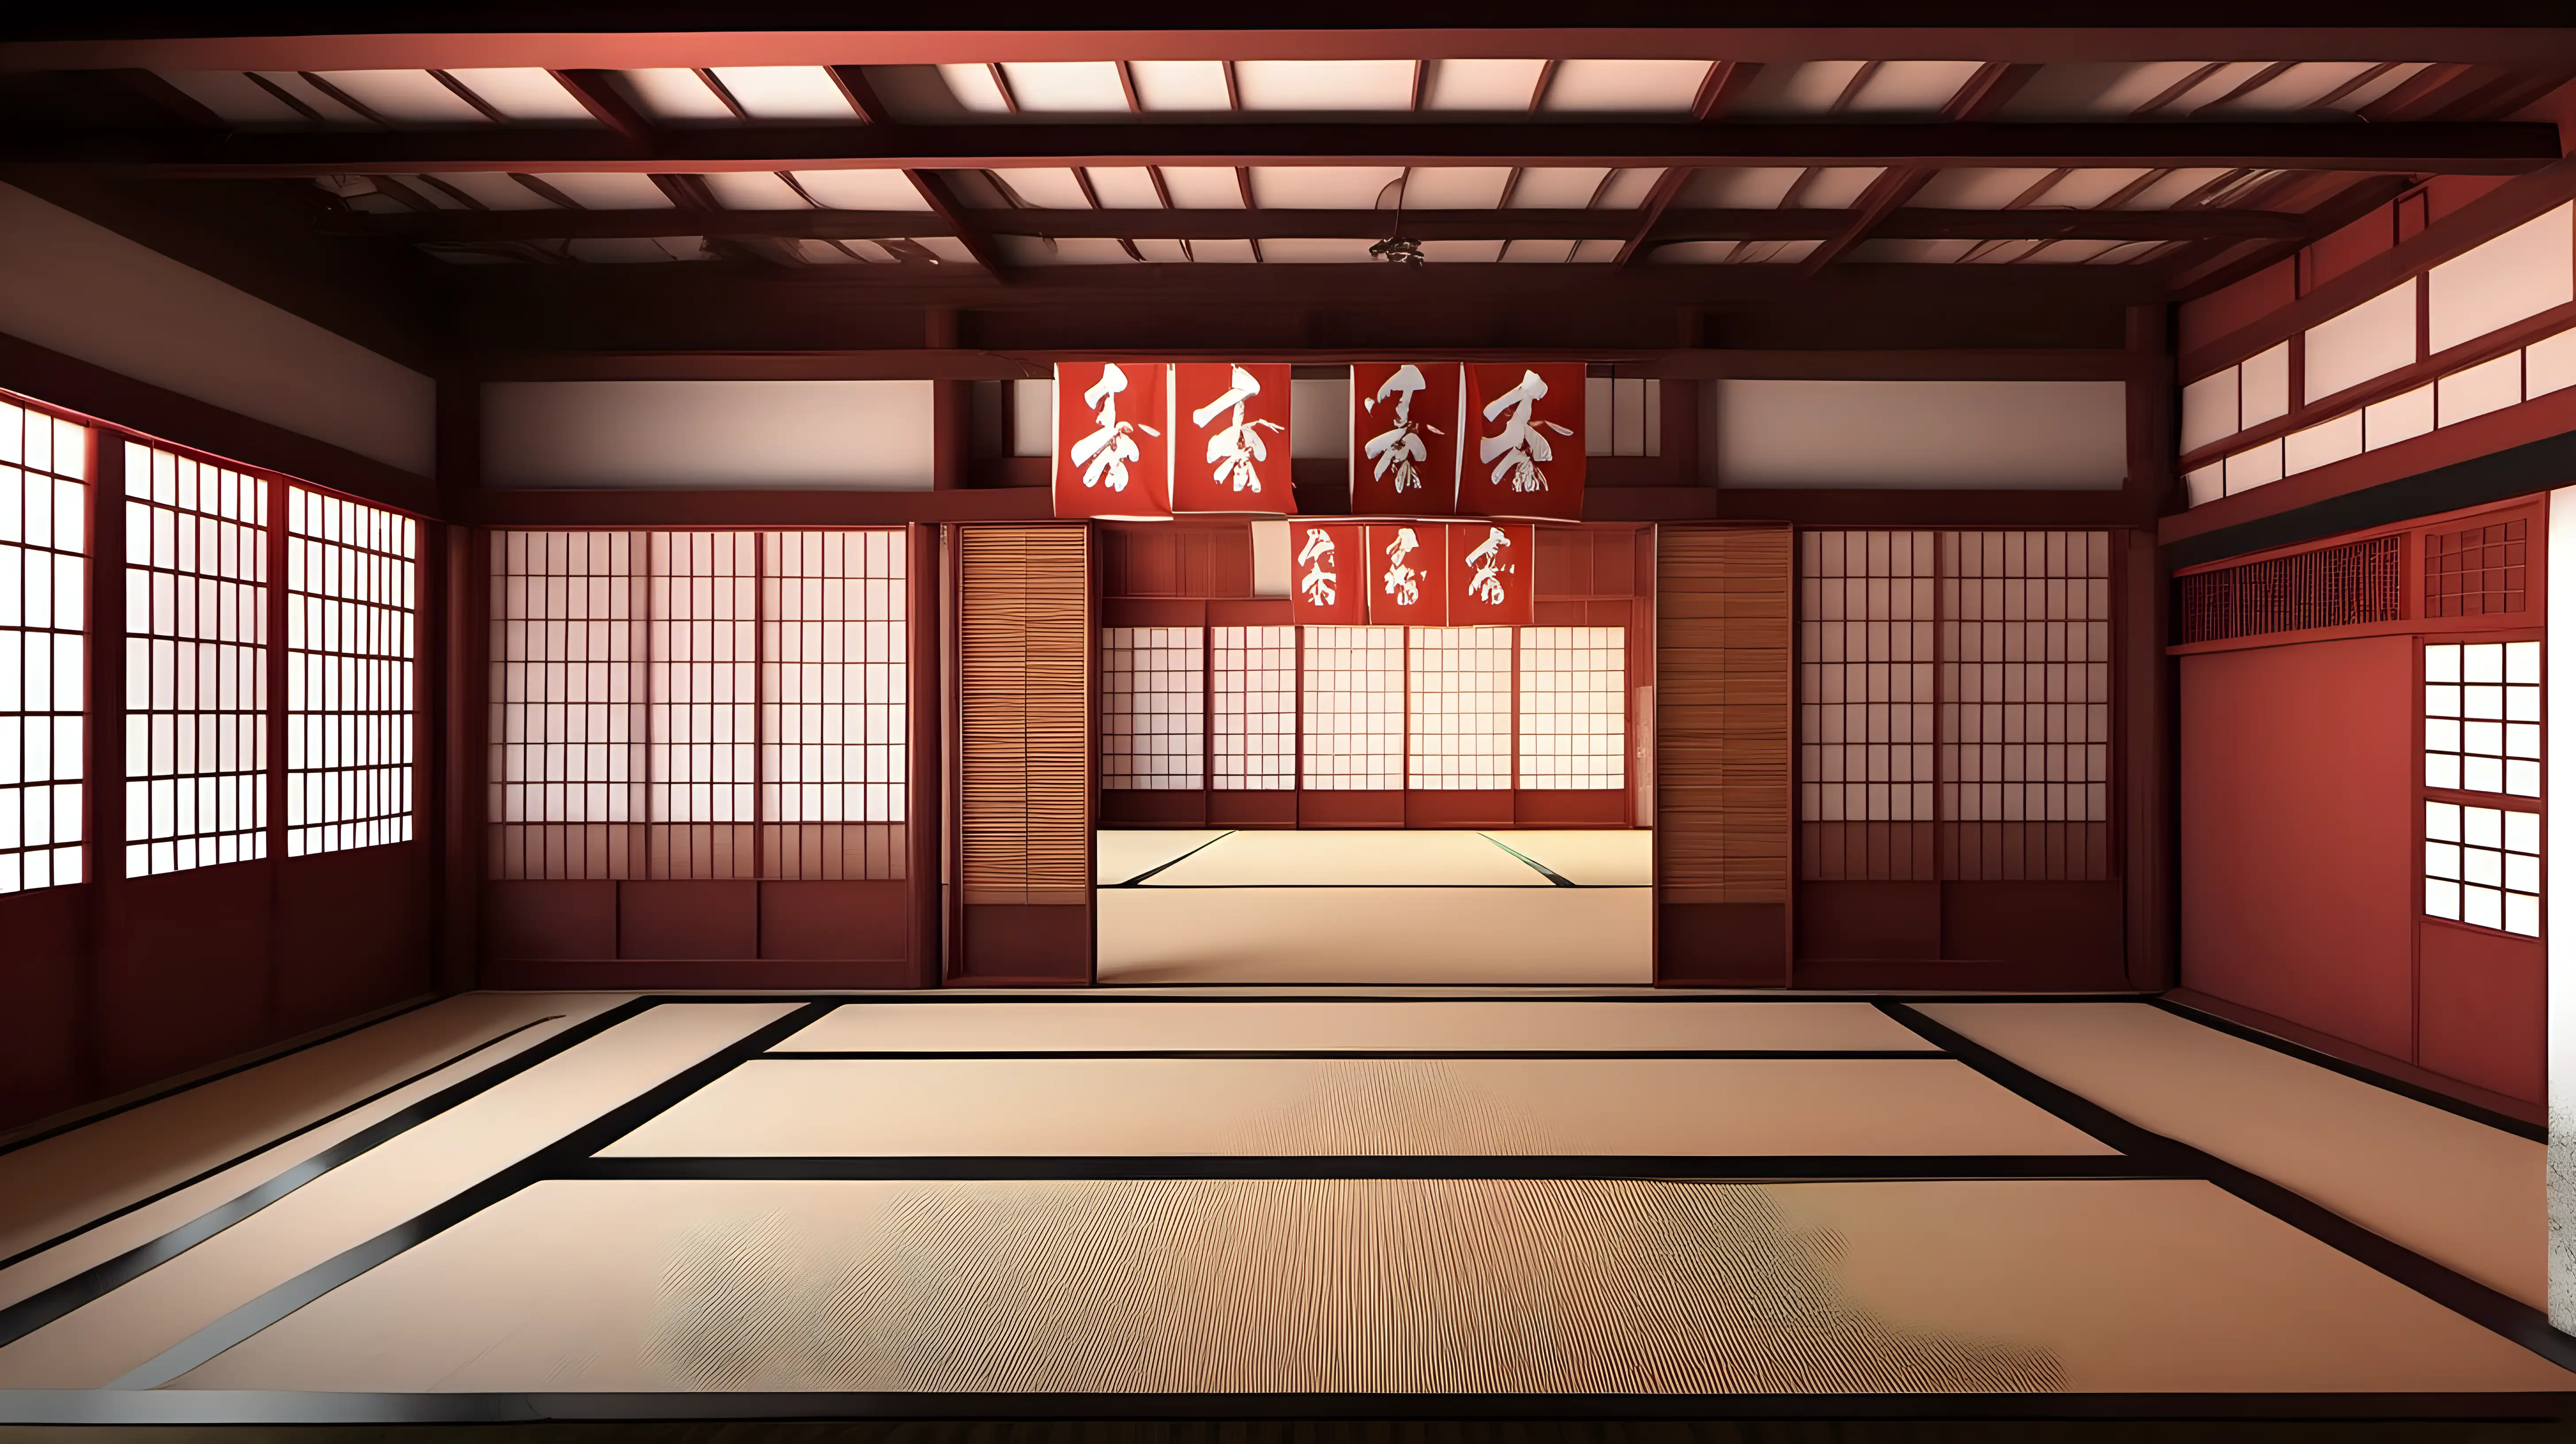 Traditional Martial Arts Dojo with Authentic Decor